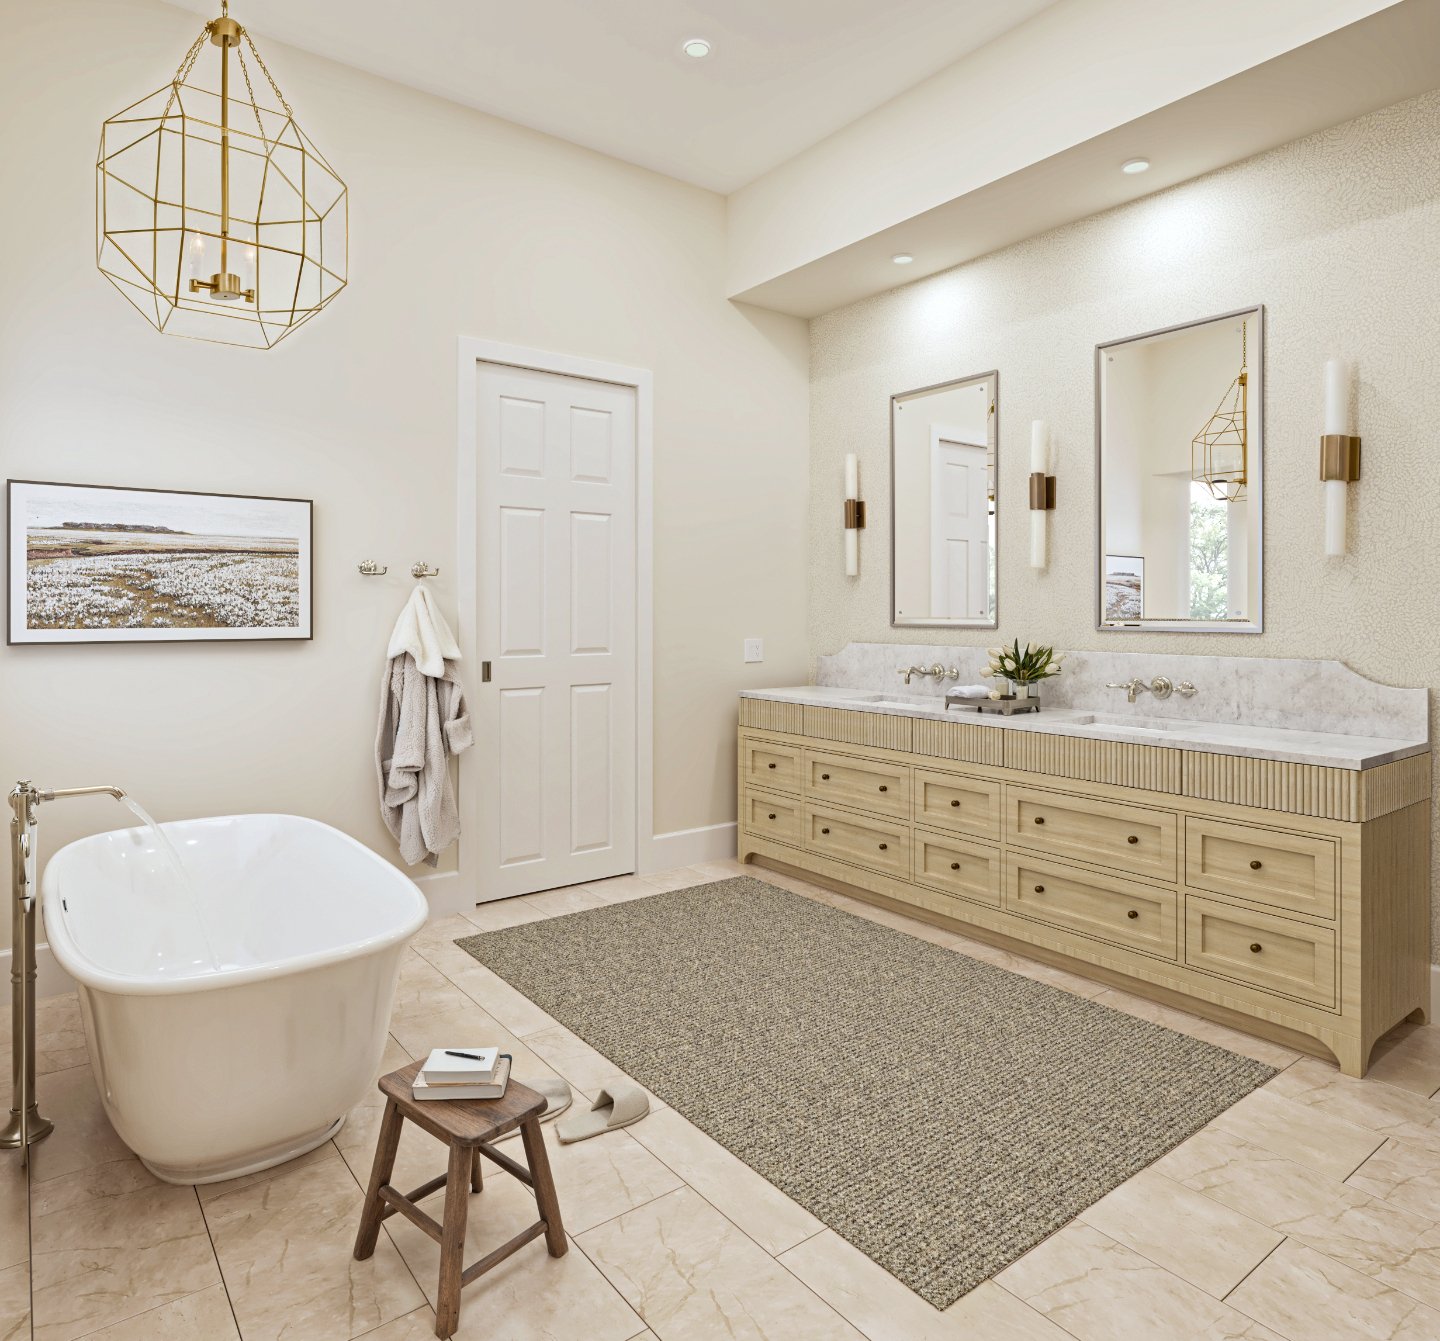 Talk about a transformation 💫

This bathroom is the spa day we all need. It&rsquo;s sophisticated, luxurious and beautiful giving us all the feels.

Also - If these renderings look this amazing, I can&rsquo;t wait to see this project completed in re